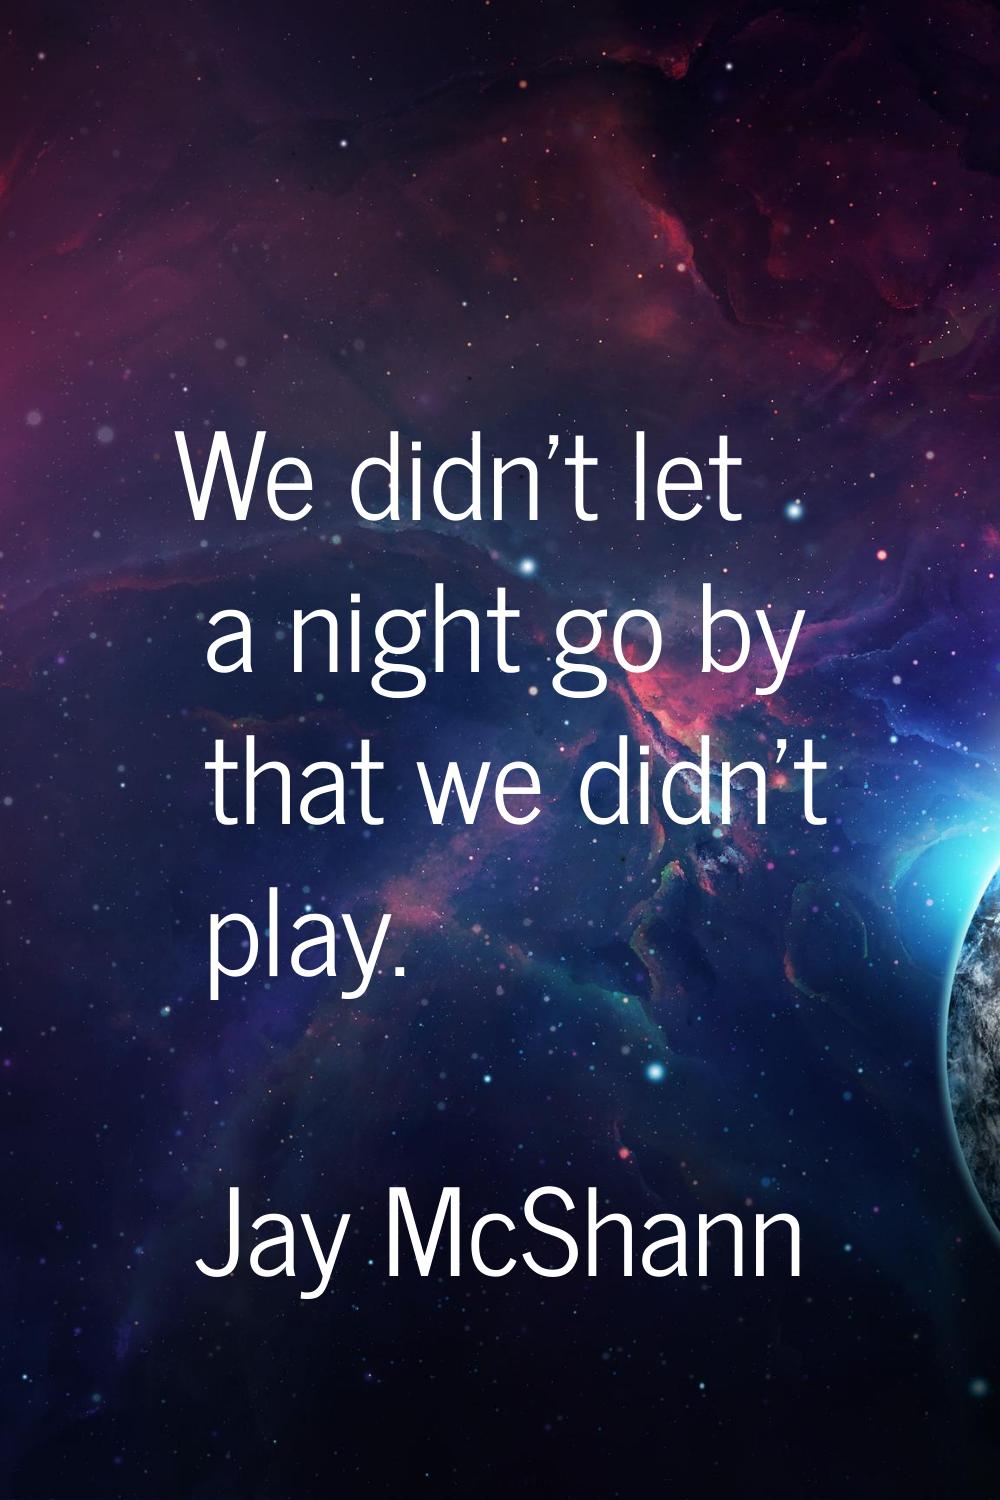 We didn't let a night go by that we didn't play.